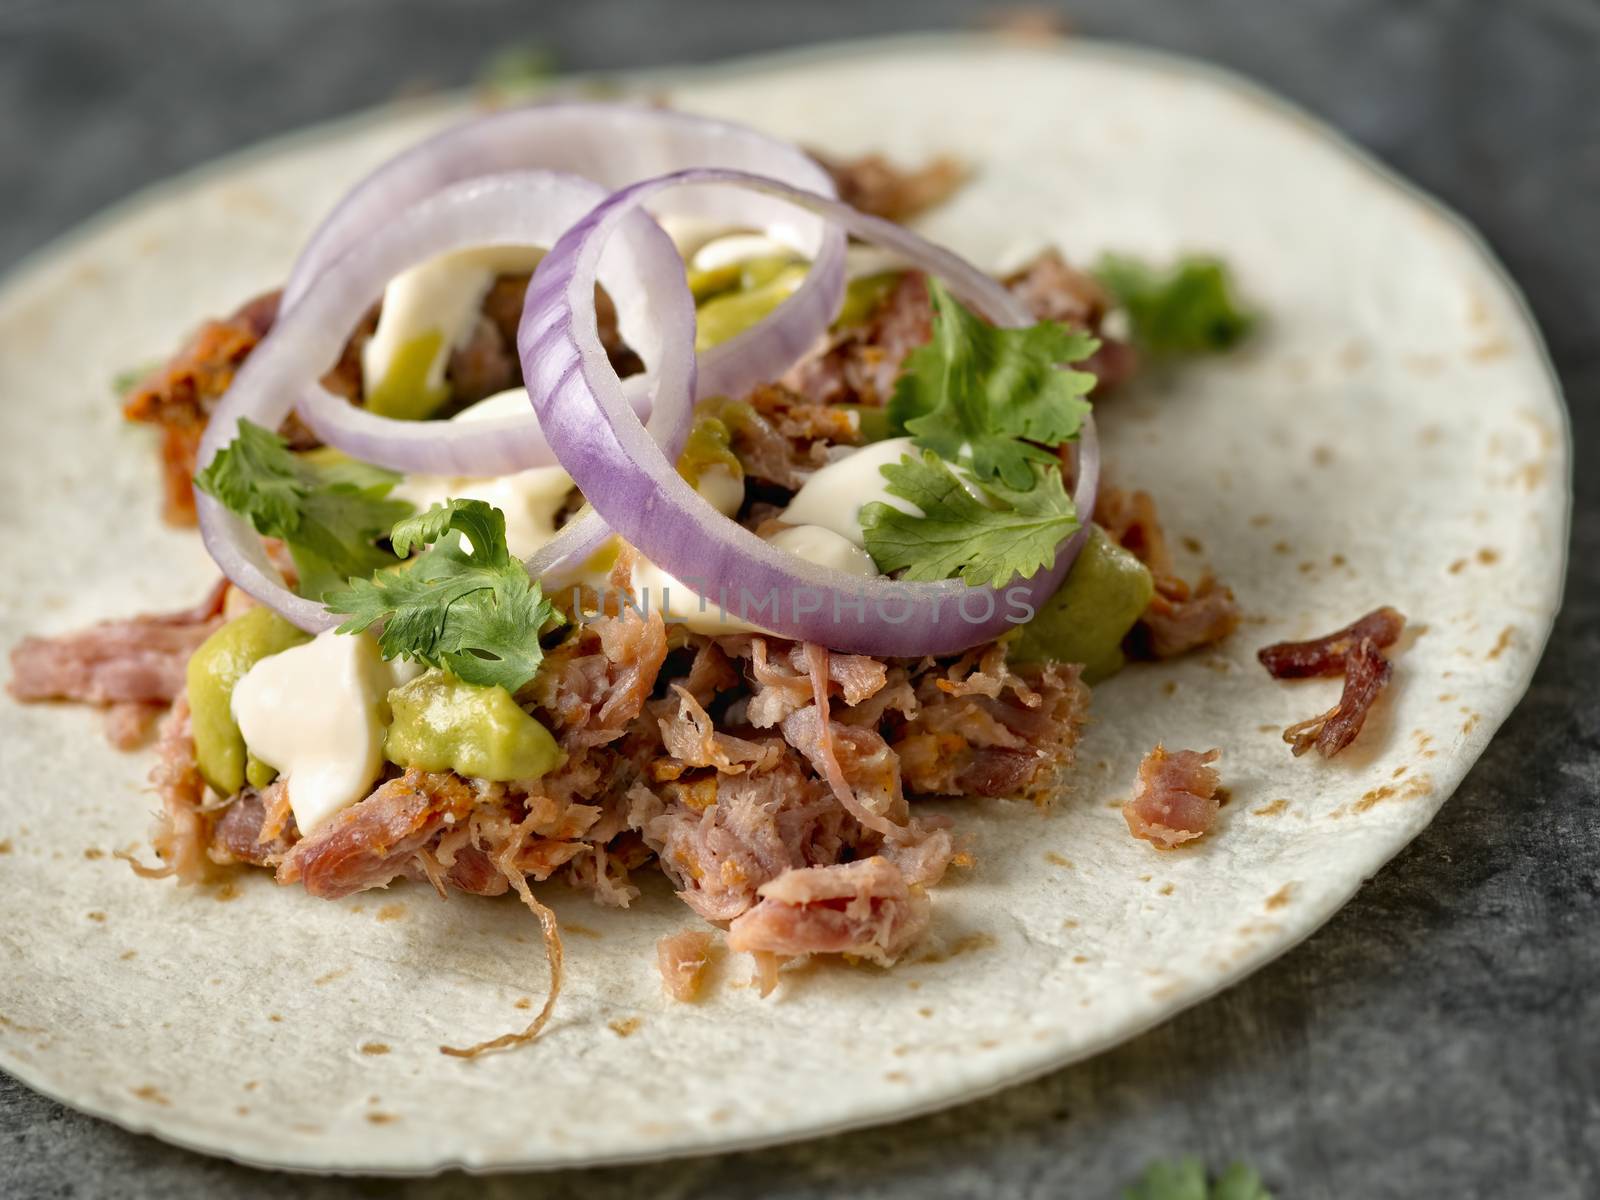 rustic mexican american pulled pork tacos by zkruger